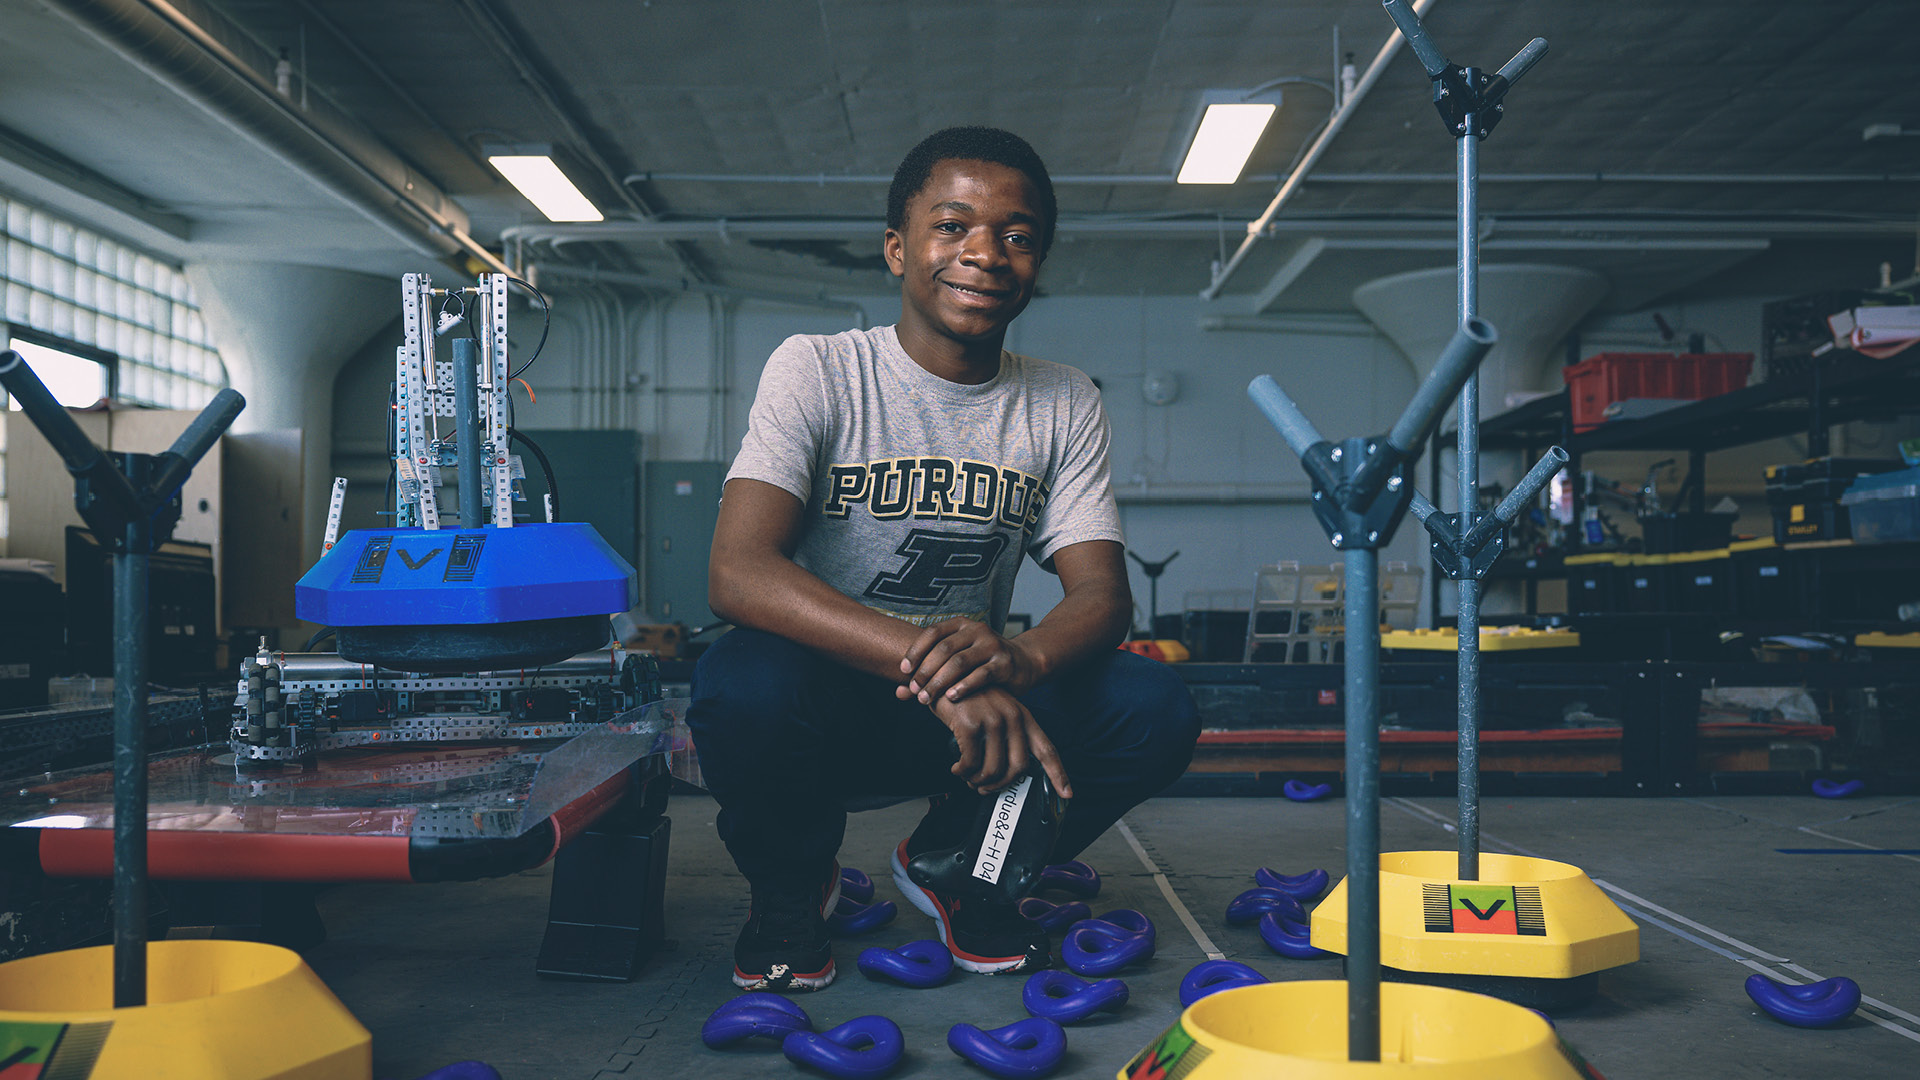 Asunami Gregoire Kalupala, a freshman at Purdue Polytechnic High School Schweitzer Center at Englewood in Indianapolis, is with his team’s VEX robot. He will be representing PPHS at the VEX Robotics World Championships in Dallas in May. (Purdue University photo/Charles Jischke)